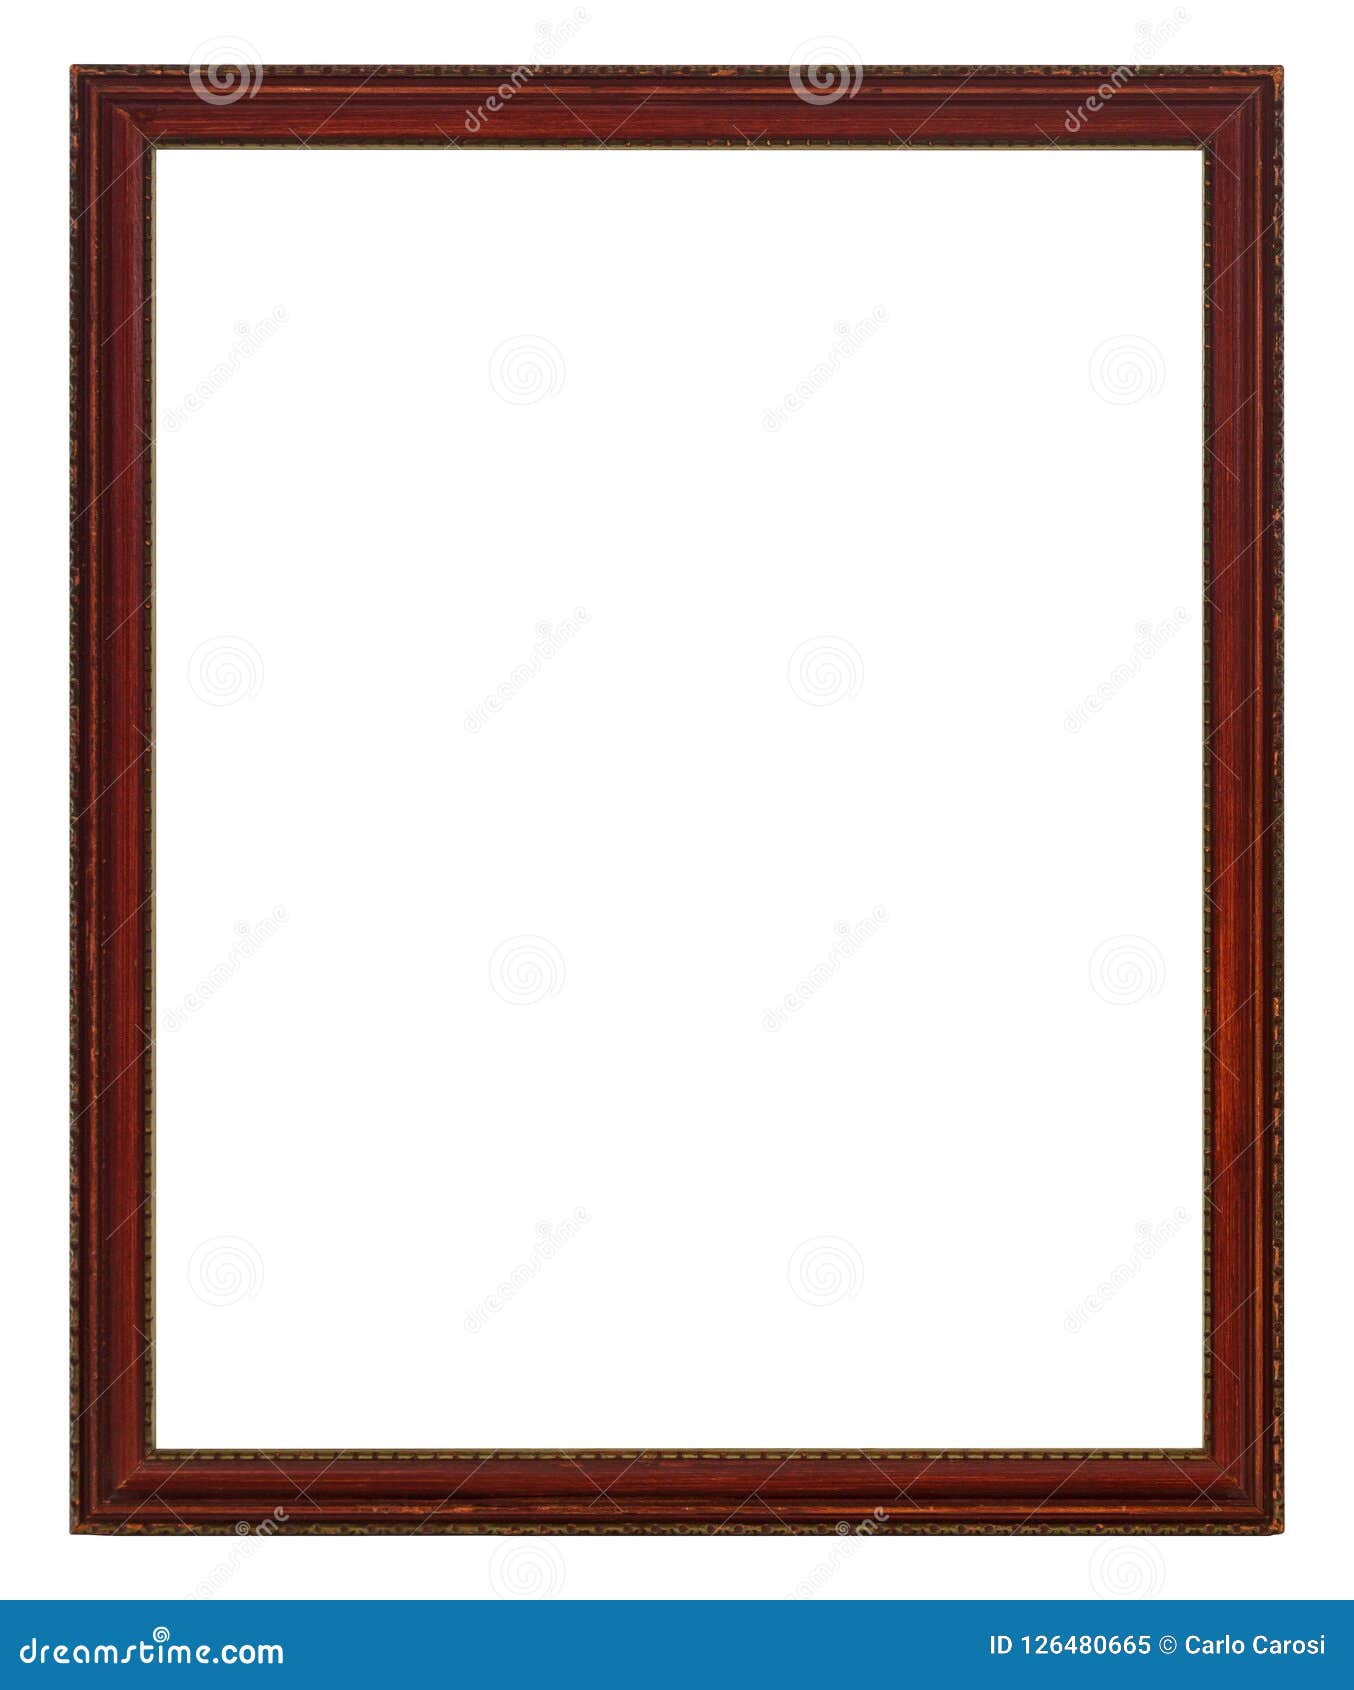 Antique Wooden Frame For Photos And Art Stock Image Image of material, crafts 126480665